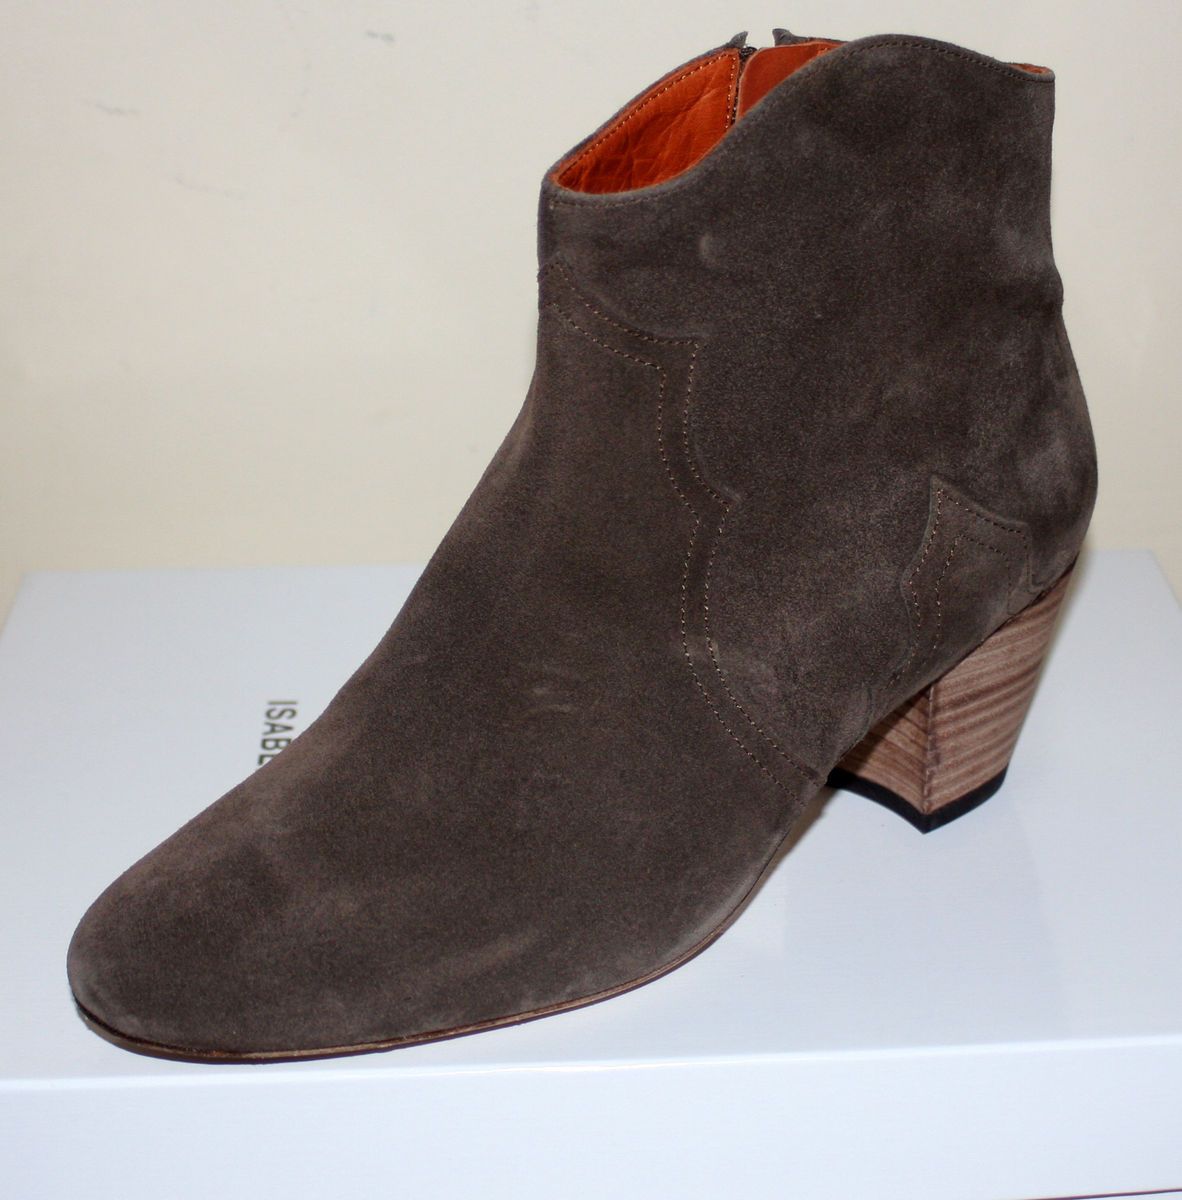 NEW SS 2012 ISABEL MARANT FAMOUS DICKER BOOTIES Size 39 TAUPE